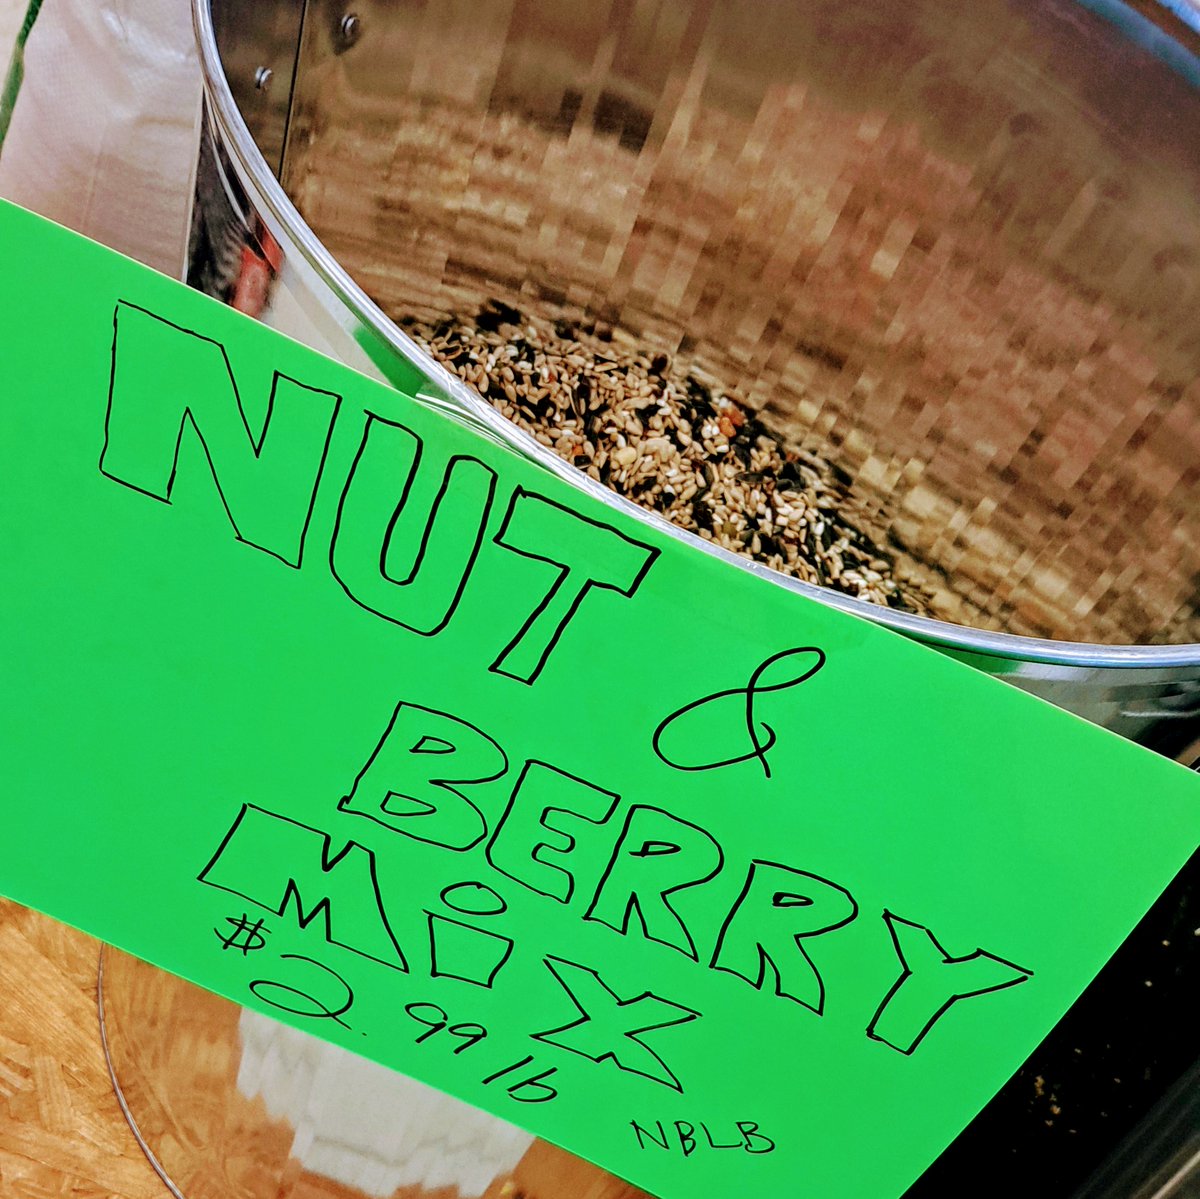 NEW to our #bythepound bird and seed selection: Nut & Berry Mix from #lawtonoklahoma #nblb 

This premium seed will have your outdoor pets chirping and squawking with delight.

@jones_seed carefully picks the best fruits and plants for this delicious blend! 

#tulsaok #localfirst